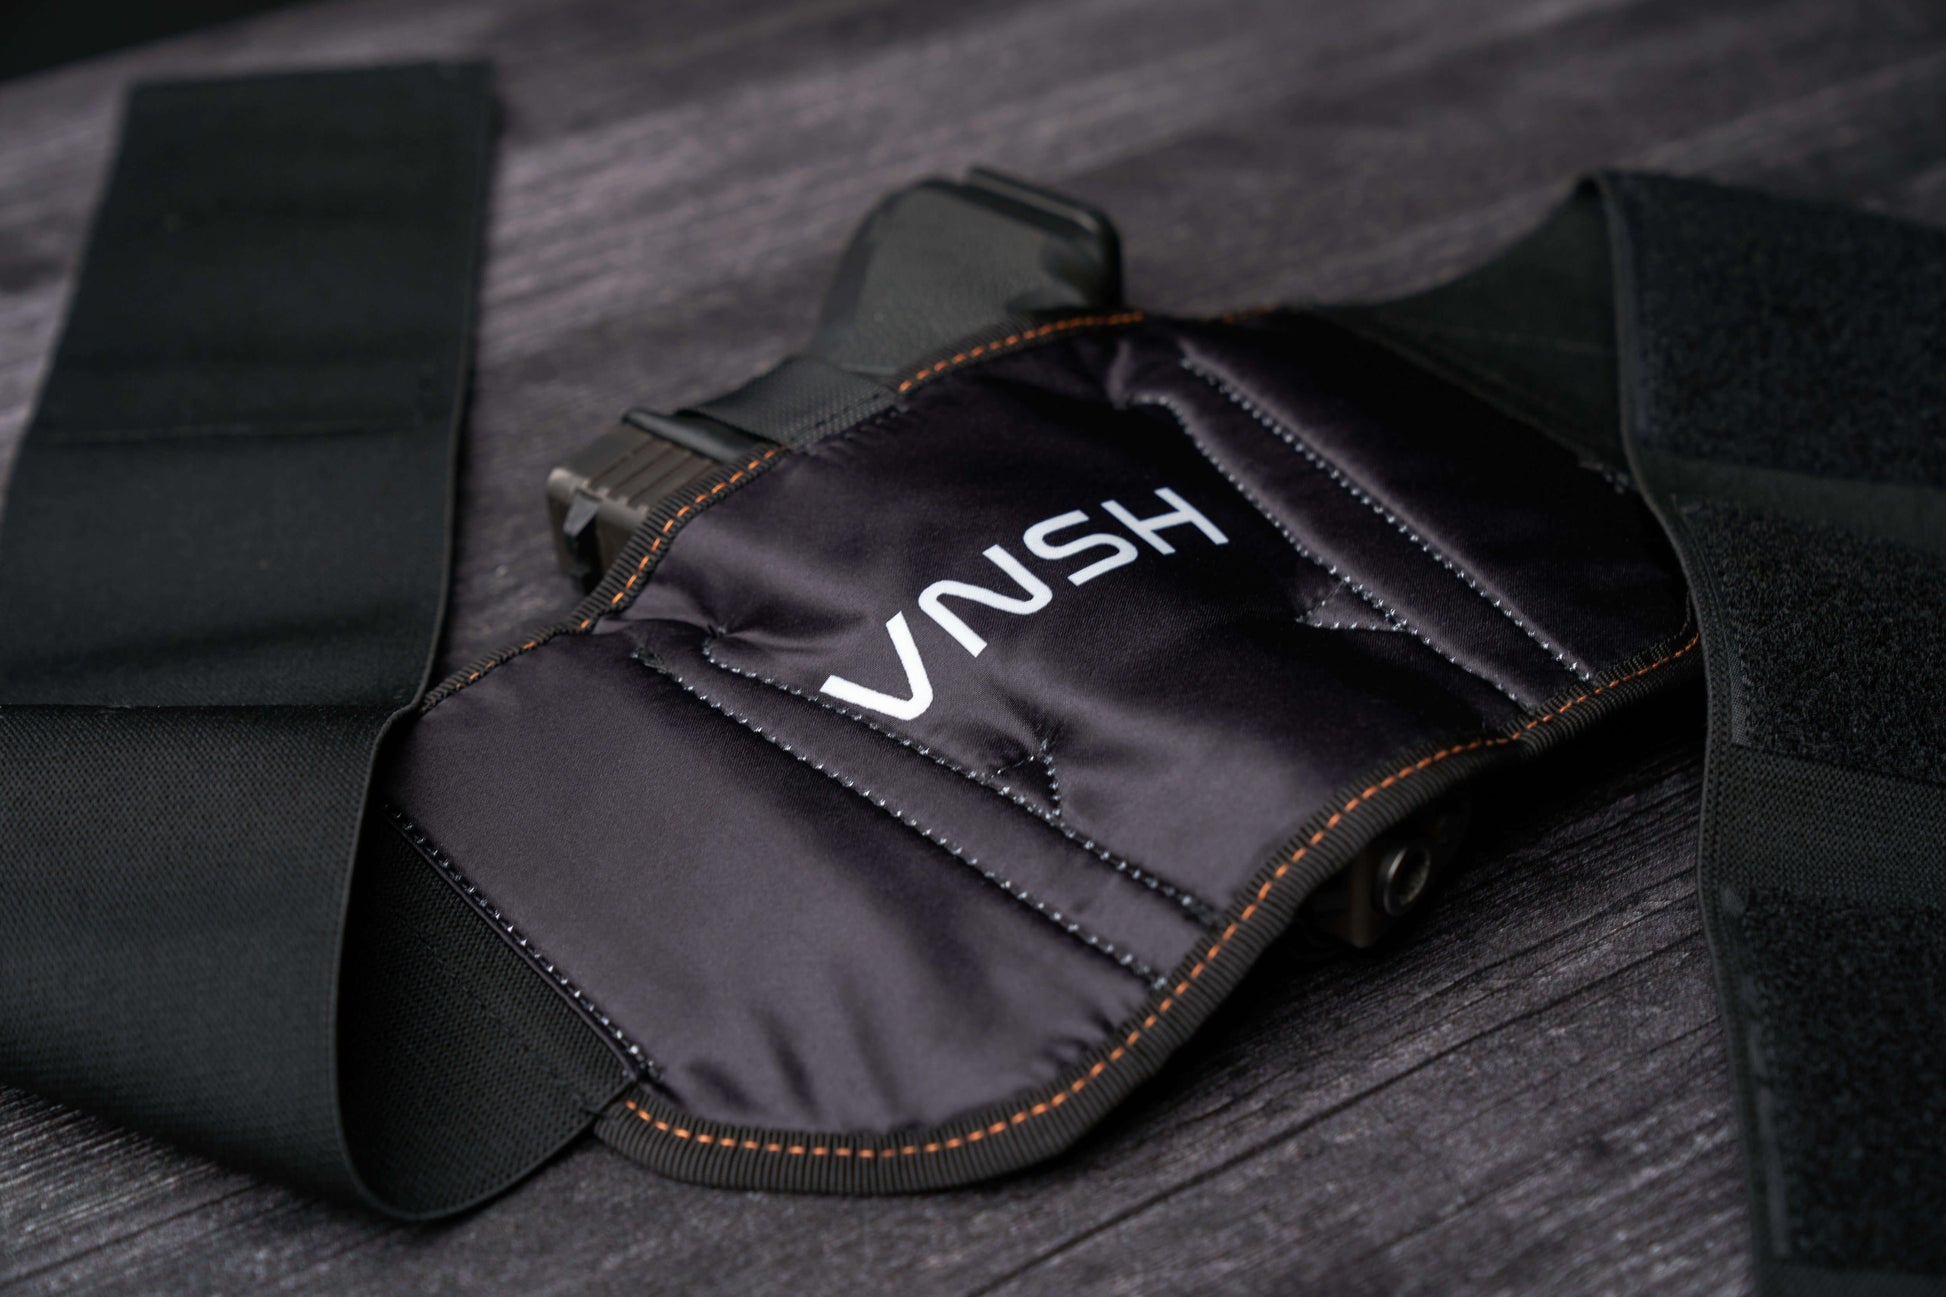 A close up view of the VNSH Black Holster showing the inner side with its logo and a gun in it